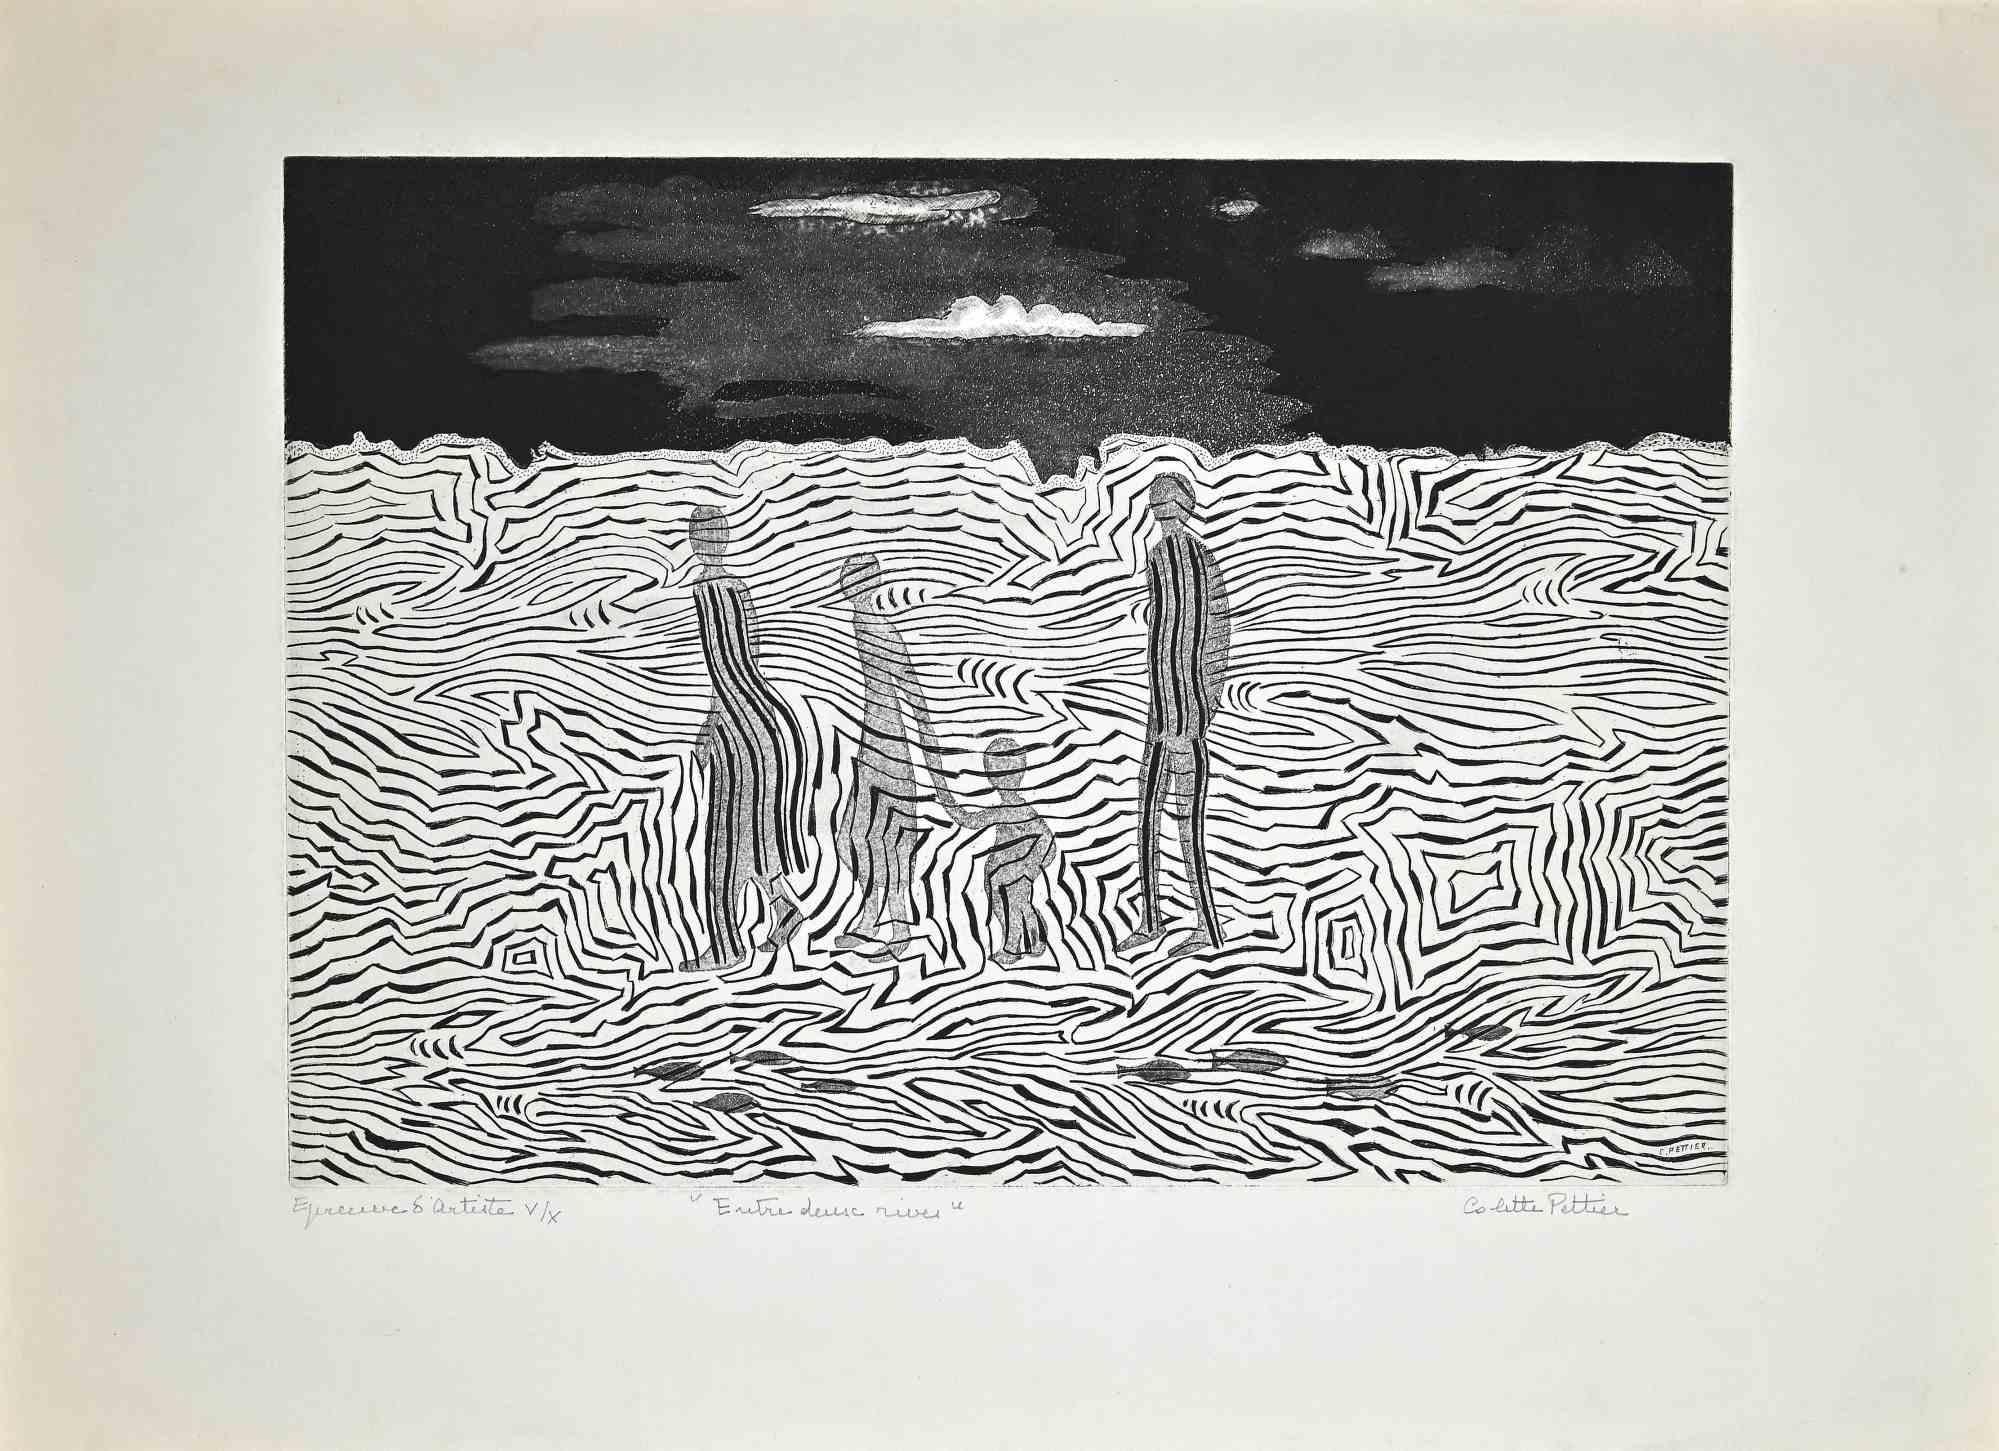 The Beach is a woodcut print realized by Colette Pettier in the 1970s.

Hand-signed and numbered, artist's proof.

Good conditions.

The artwork is created through deft strokes by mastery.